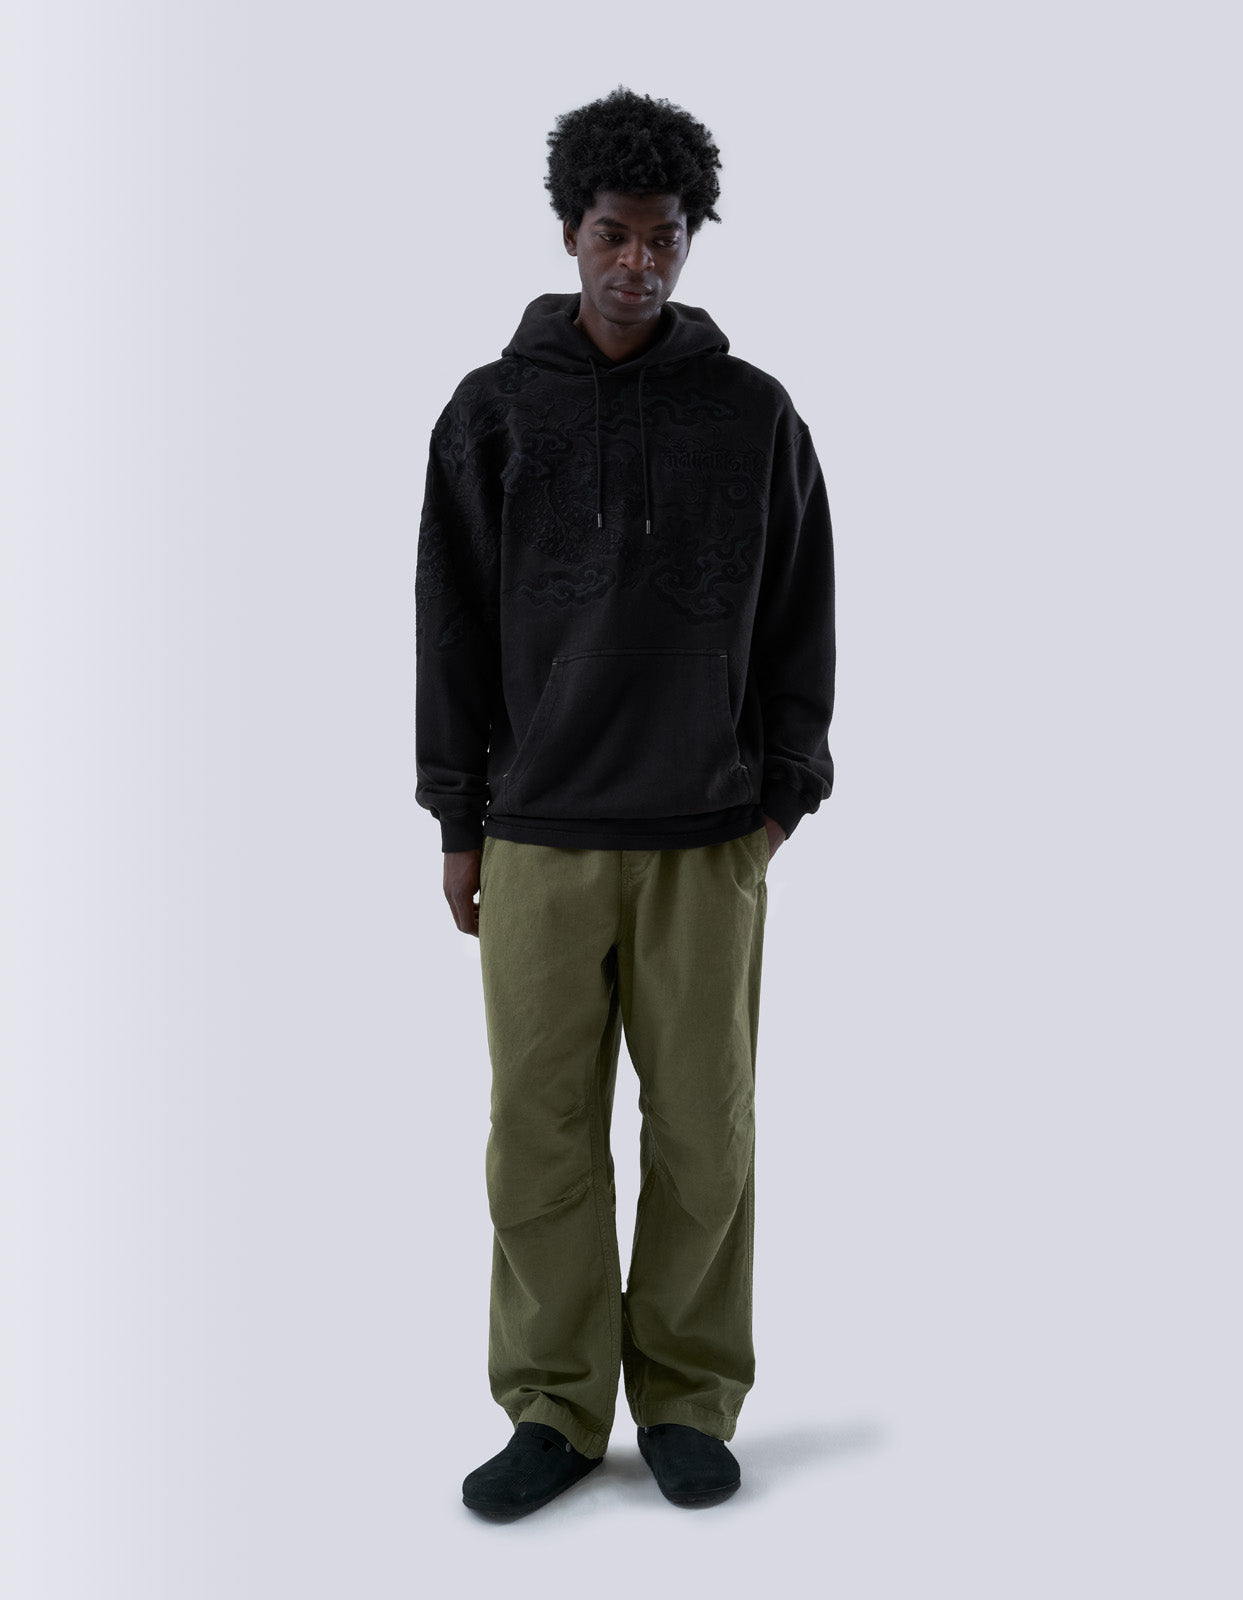 Essentials Track Pants in Olive